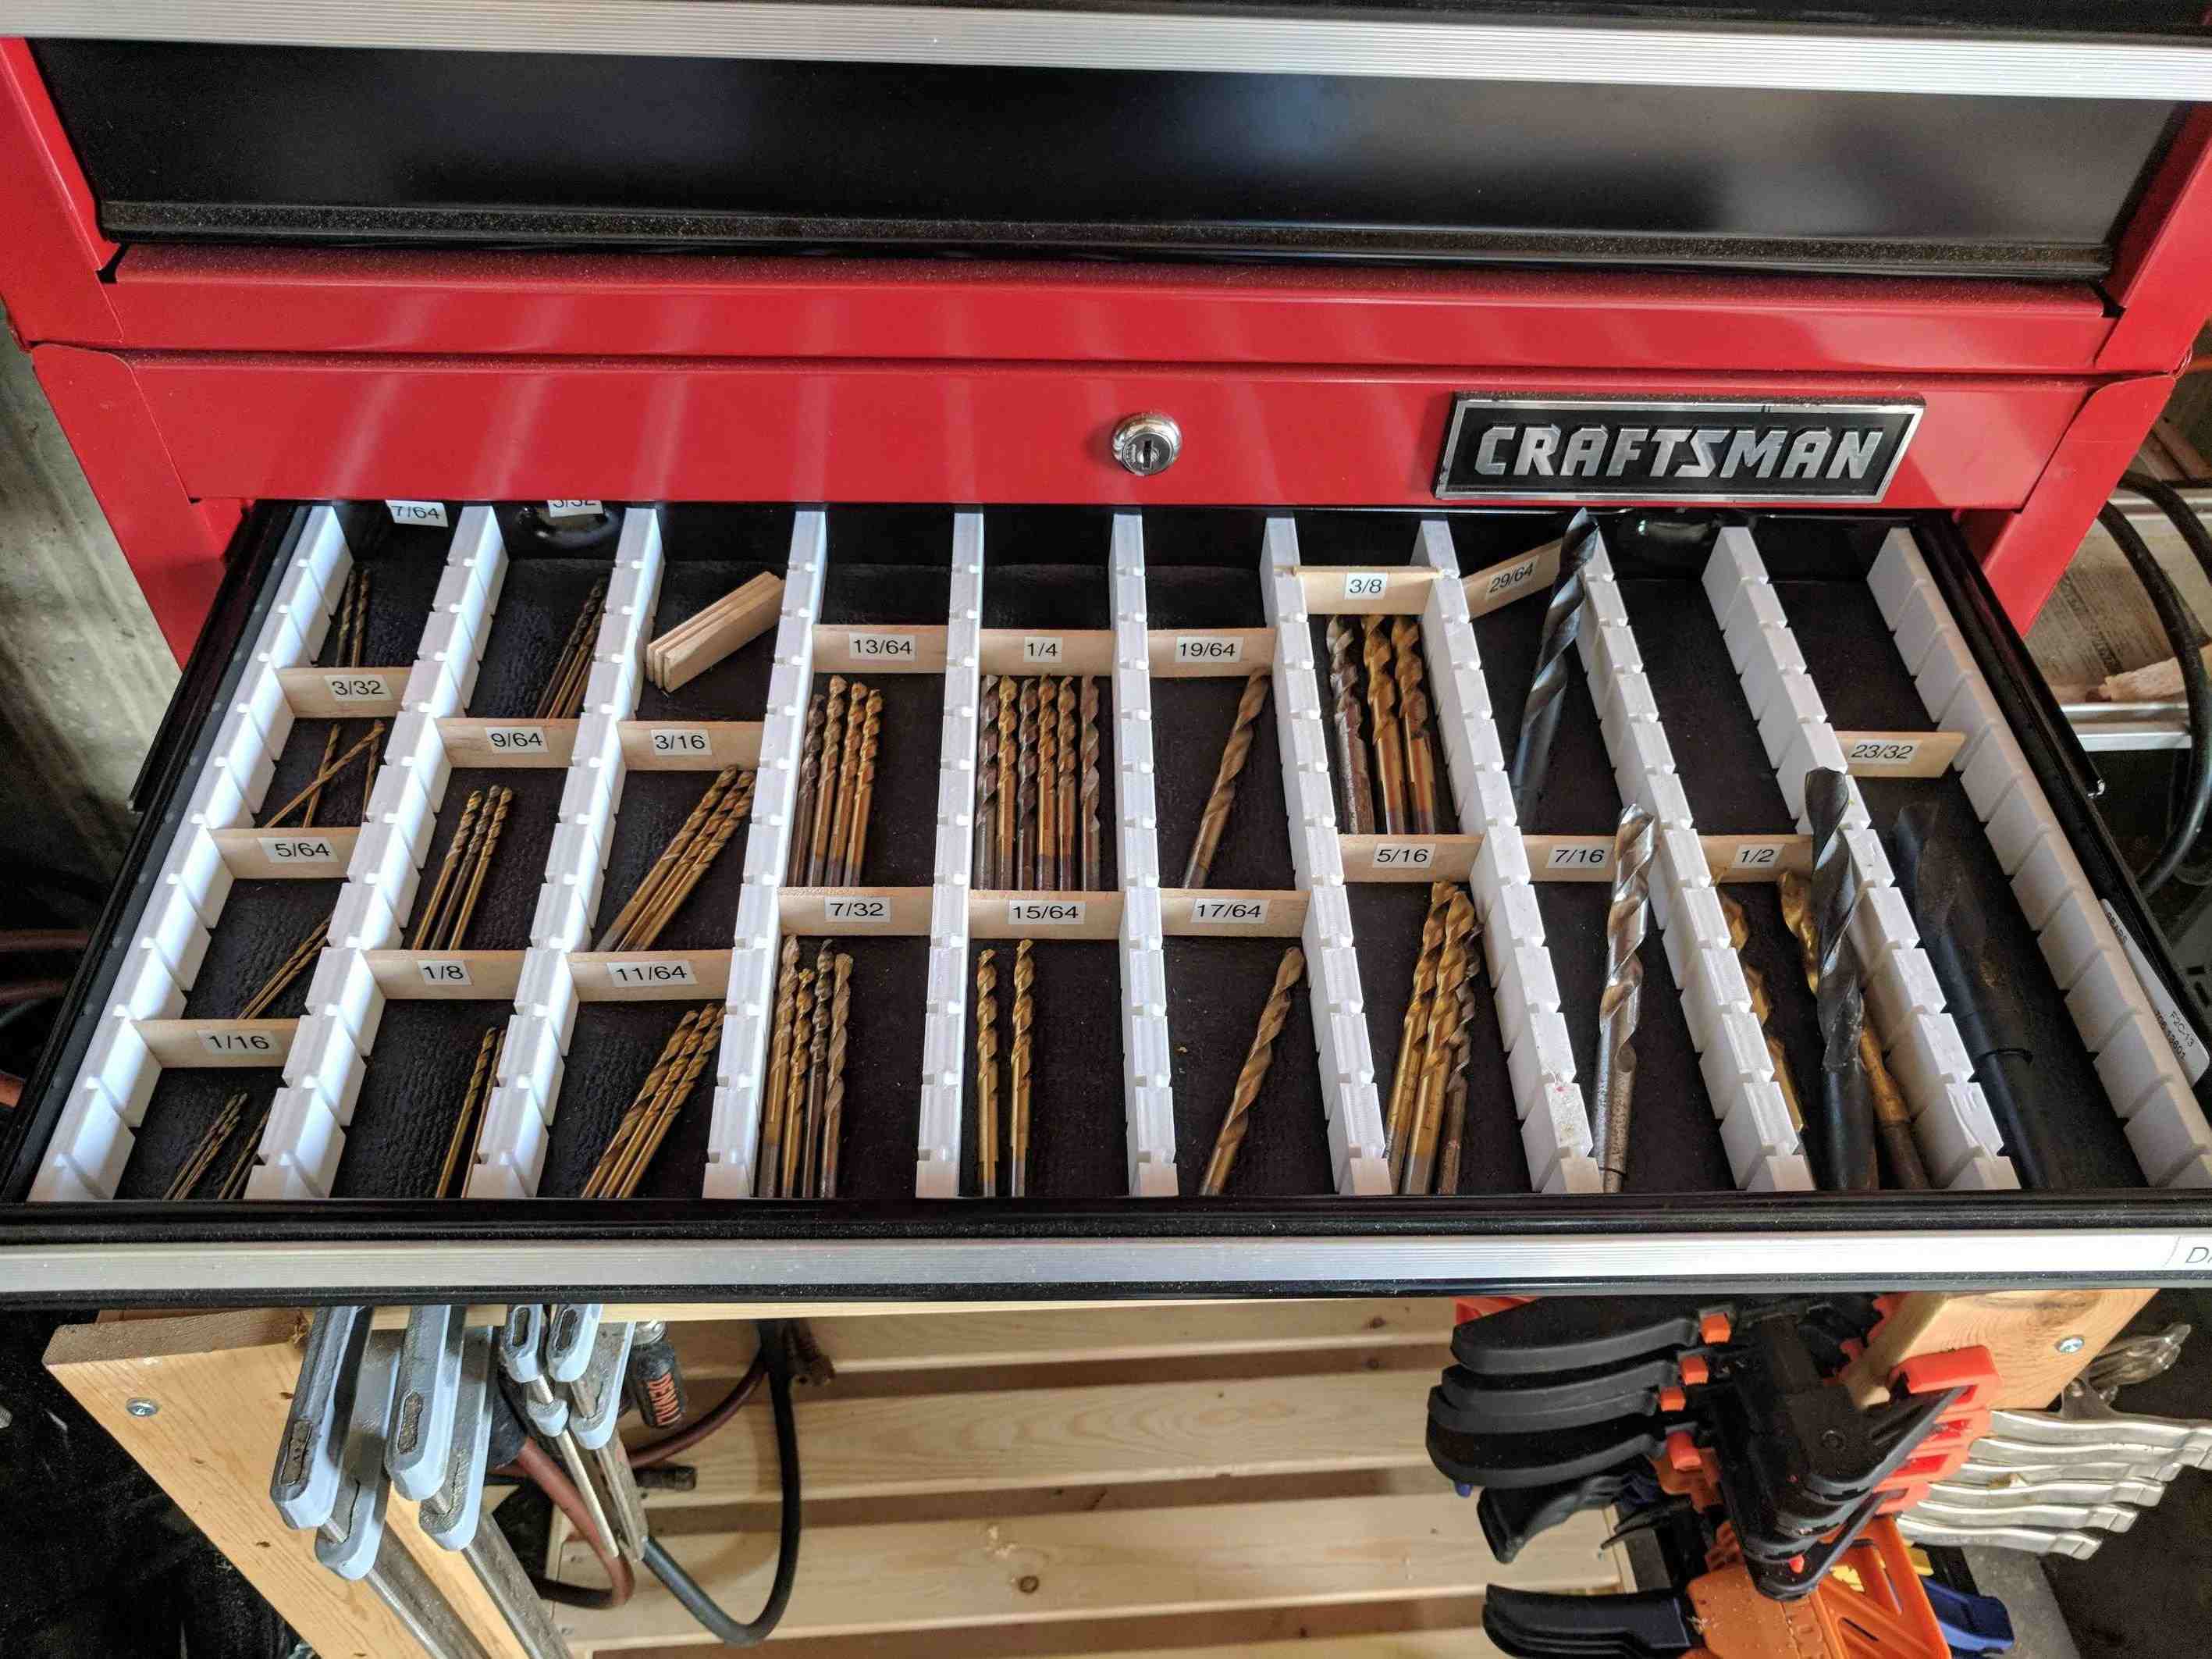 How To Organize My Craftsman Tool Chest | Storables